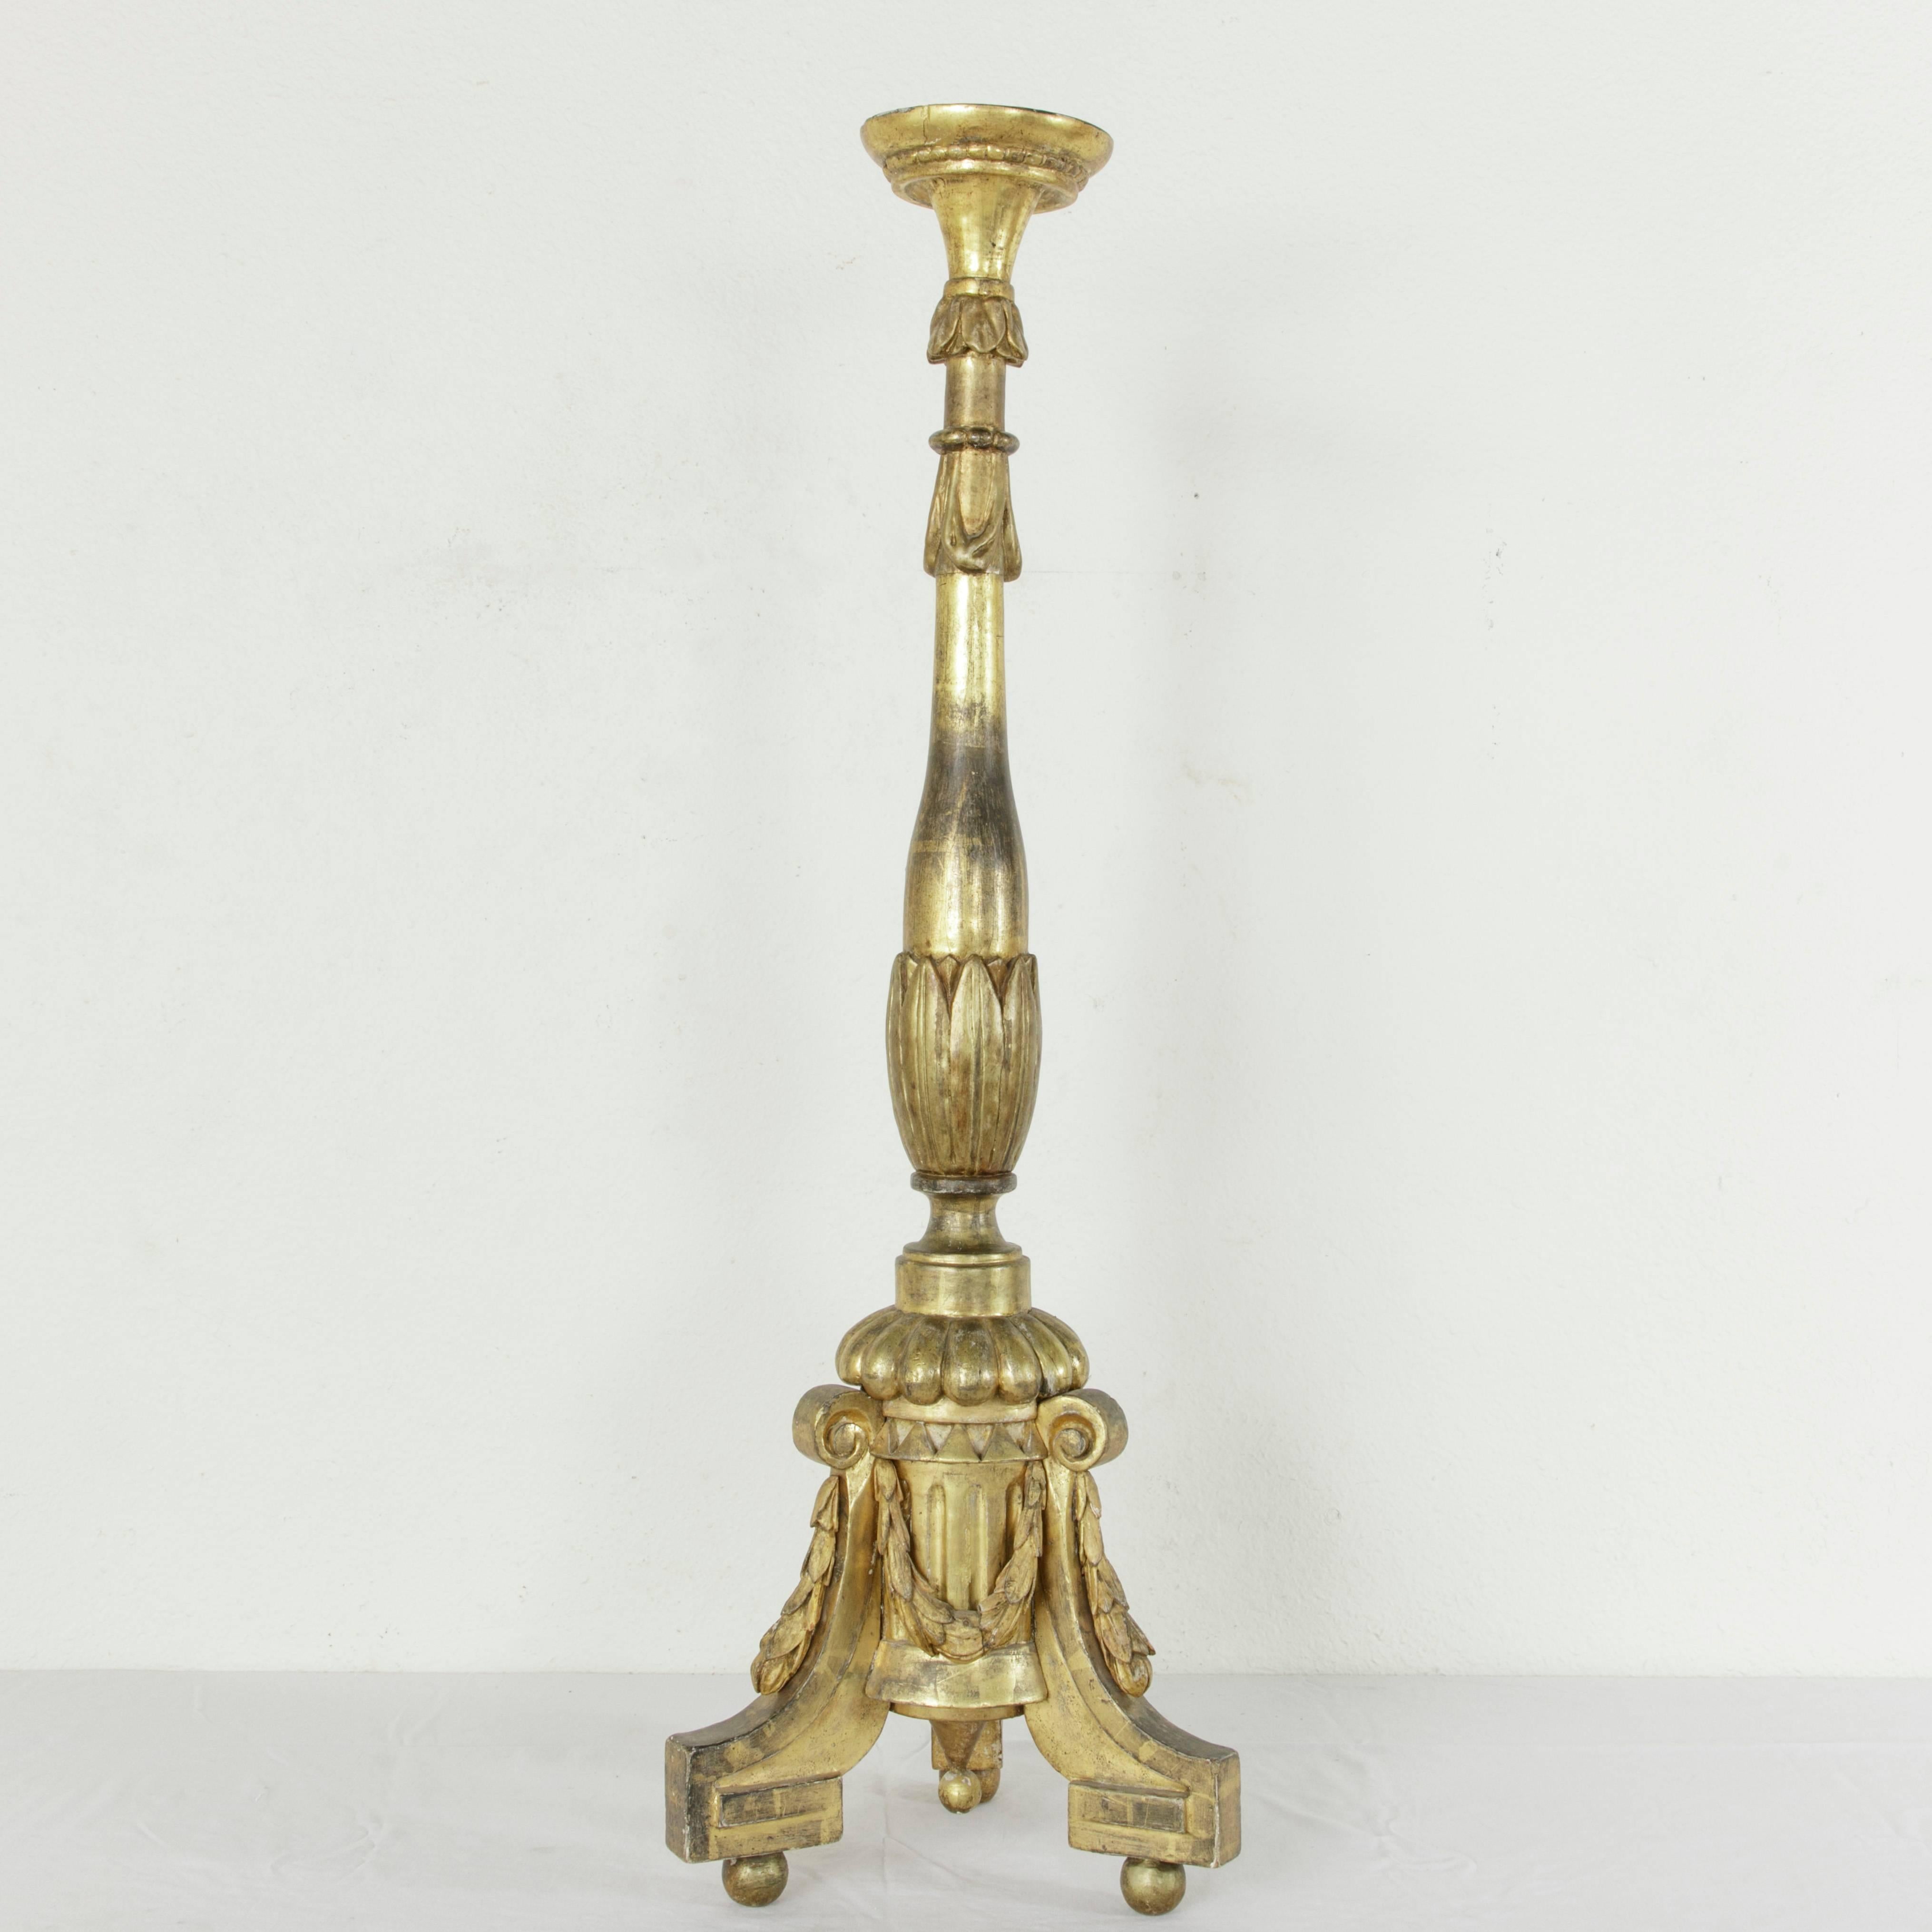 Very Tall 19th Century French Louis XVI Style Giltwood Pricket Candlestick 1